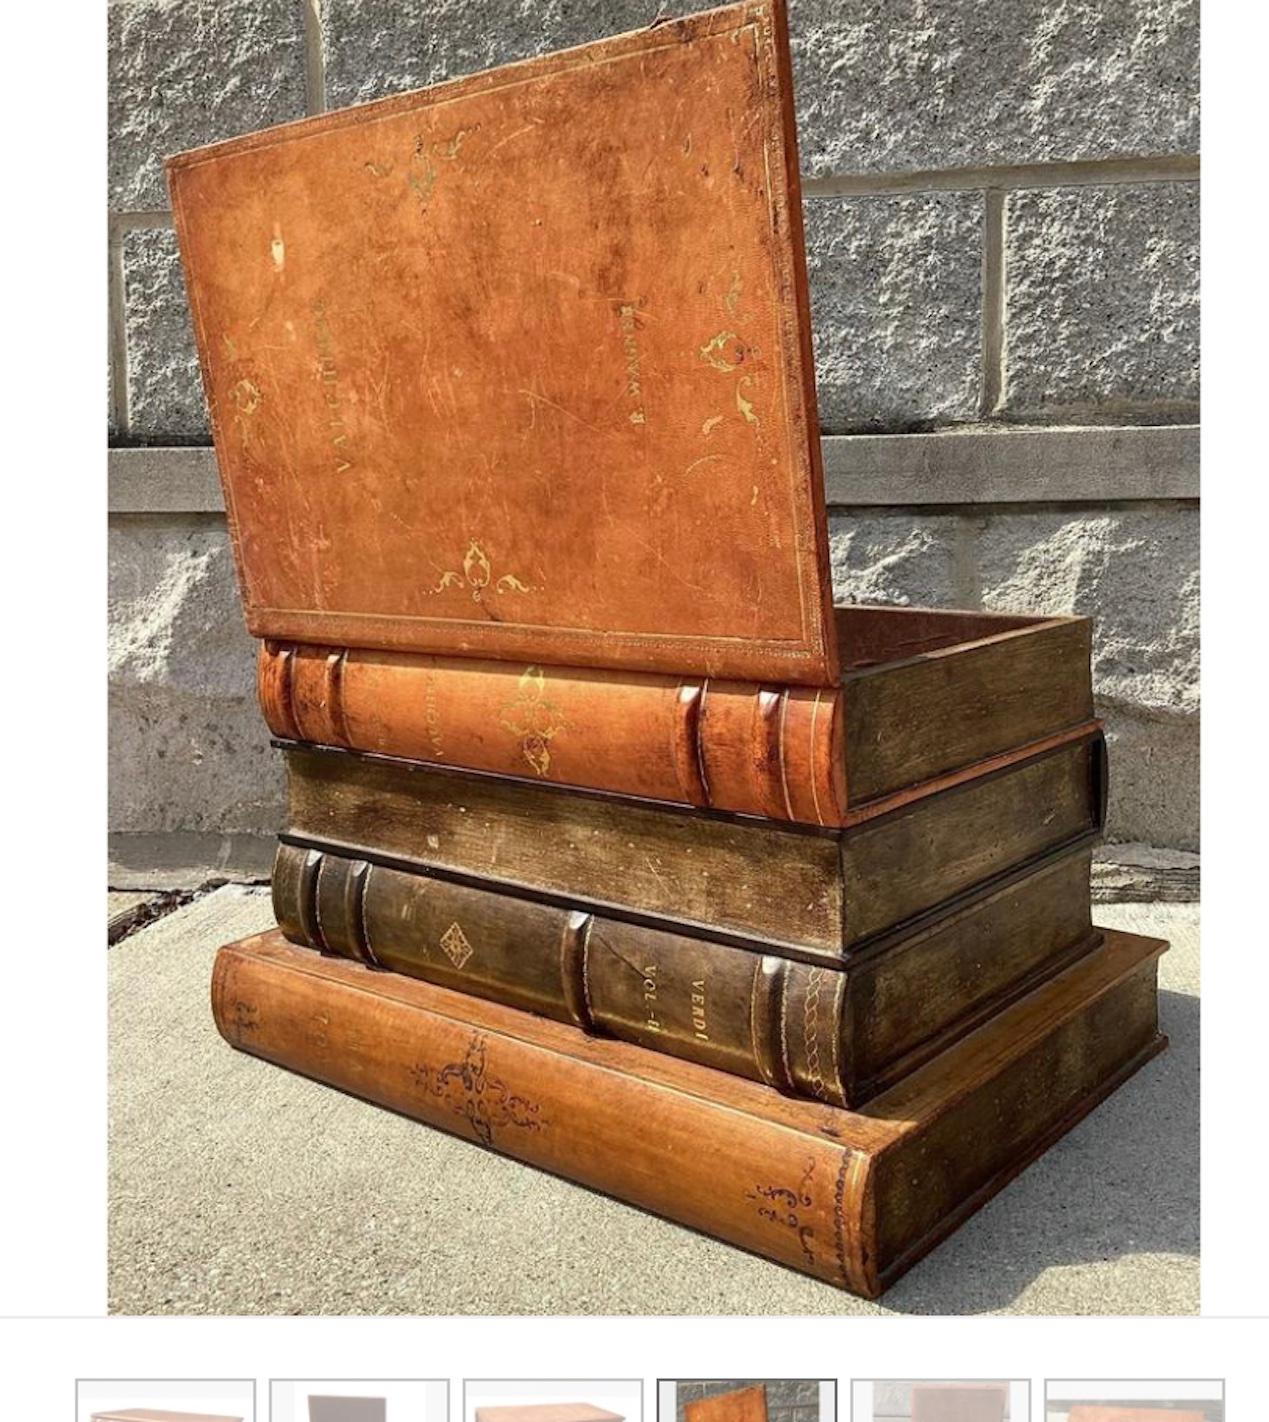 George III Handsome English Leather Bound Books As A Side Table With Interior Storage. For Sale